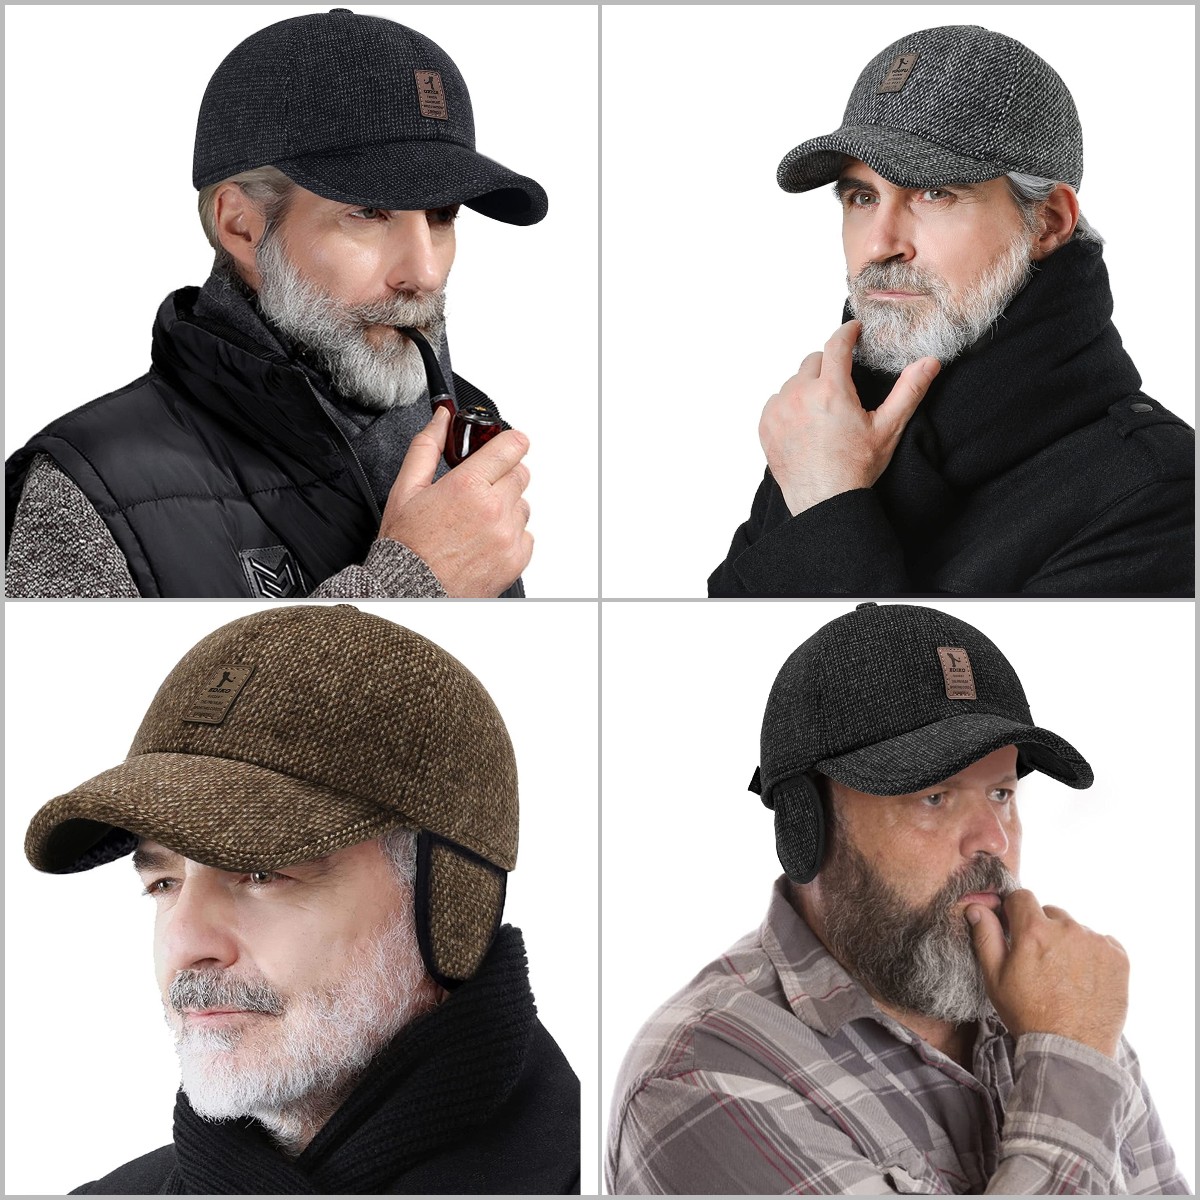 Last day 50% off - Wessiny™ Winter Baseball Cap--With Ear Muffs